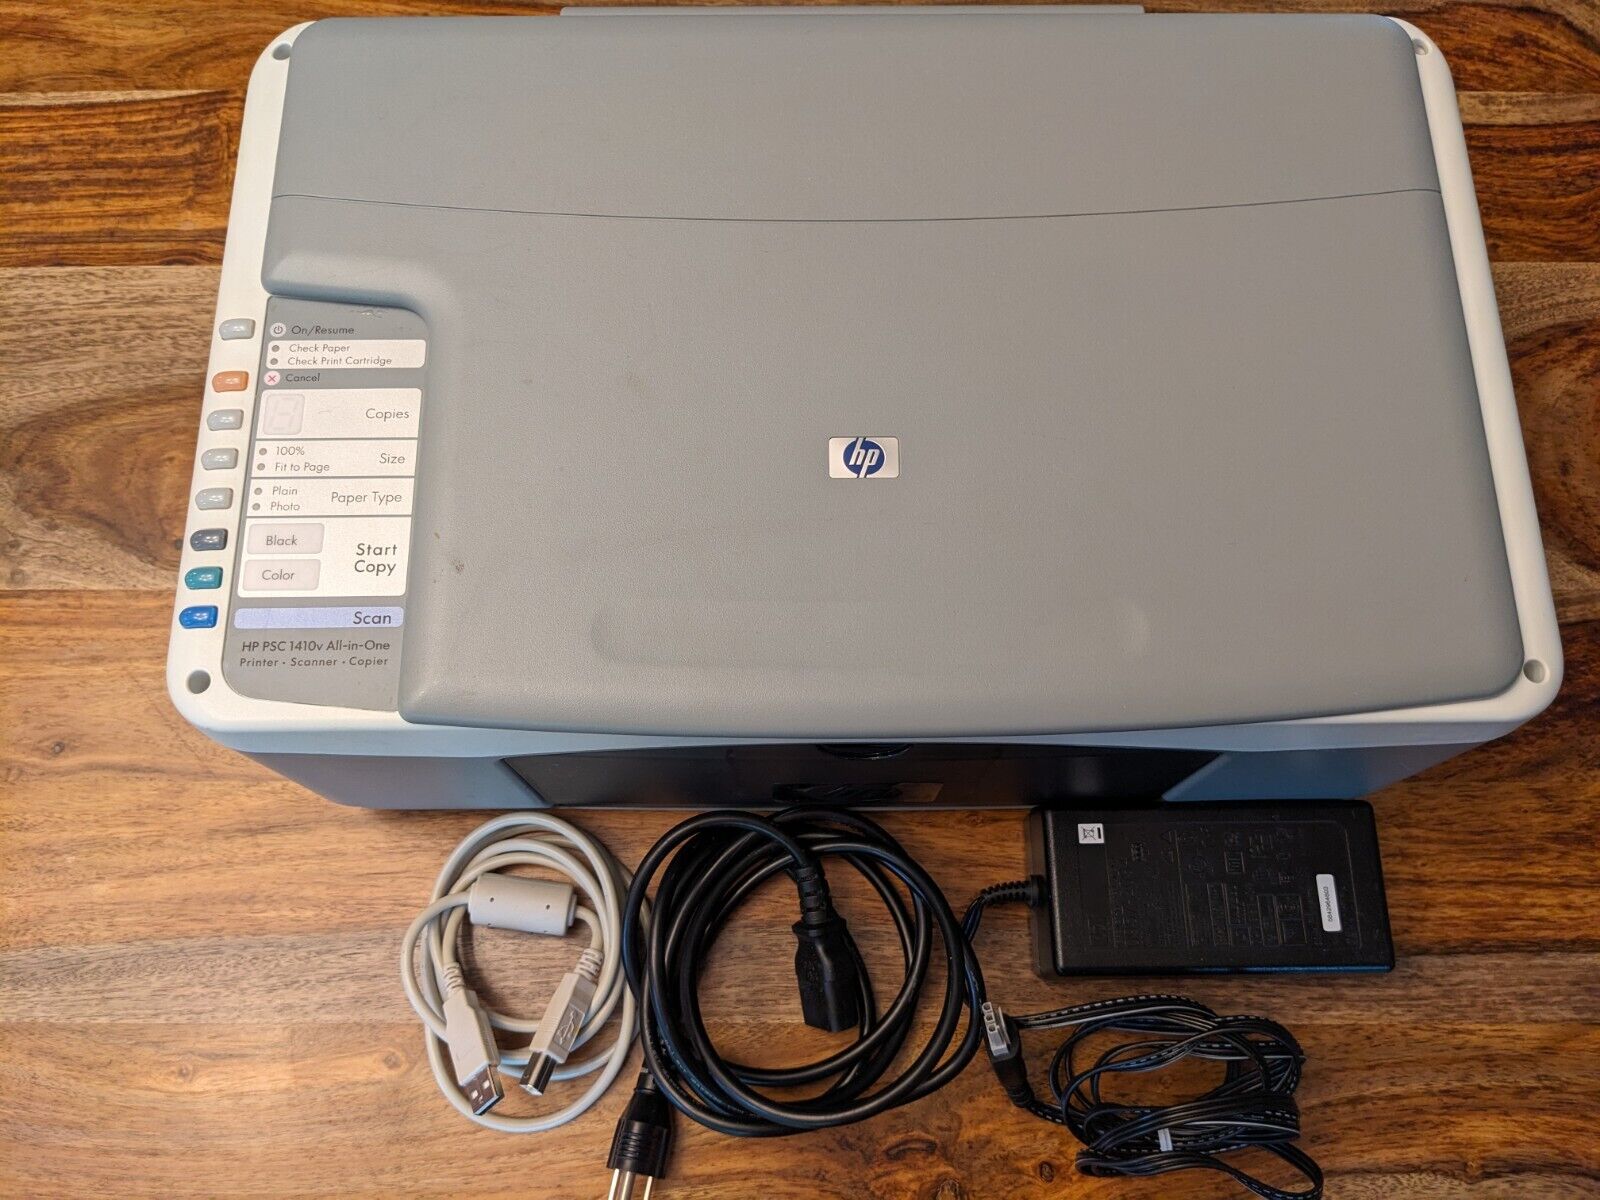 HP PSC 1410v Printer W/ Power & USB cables  & dry cartridges for Scanning only